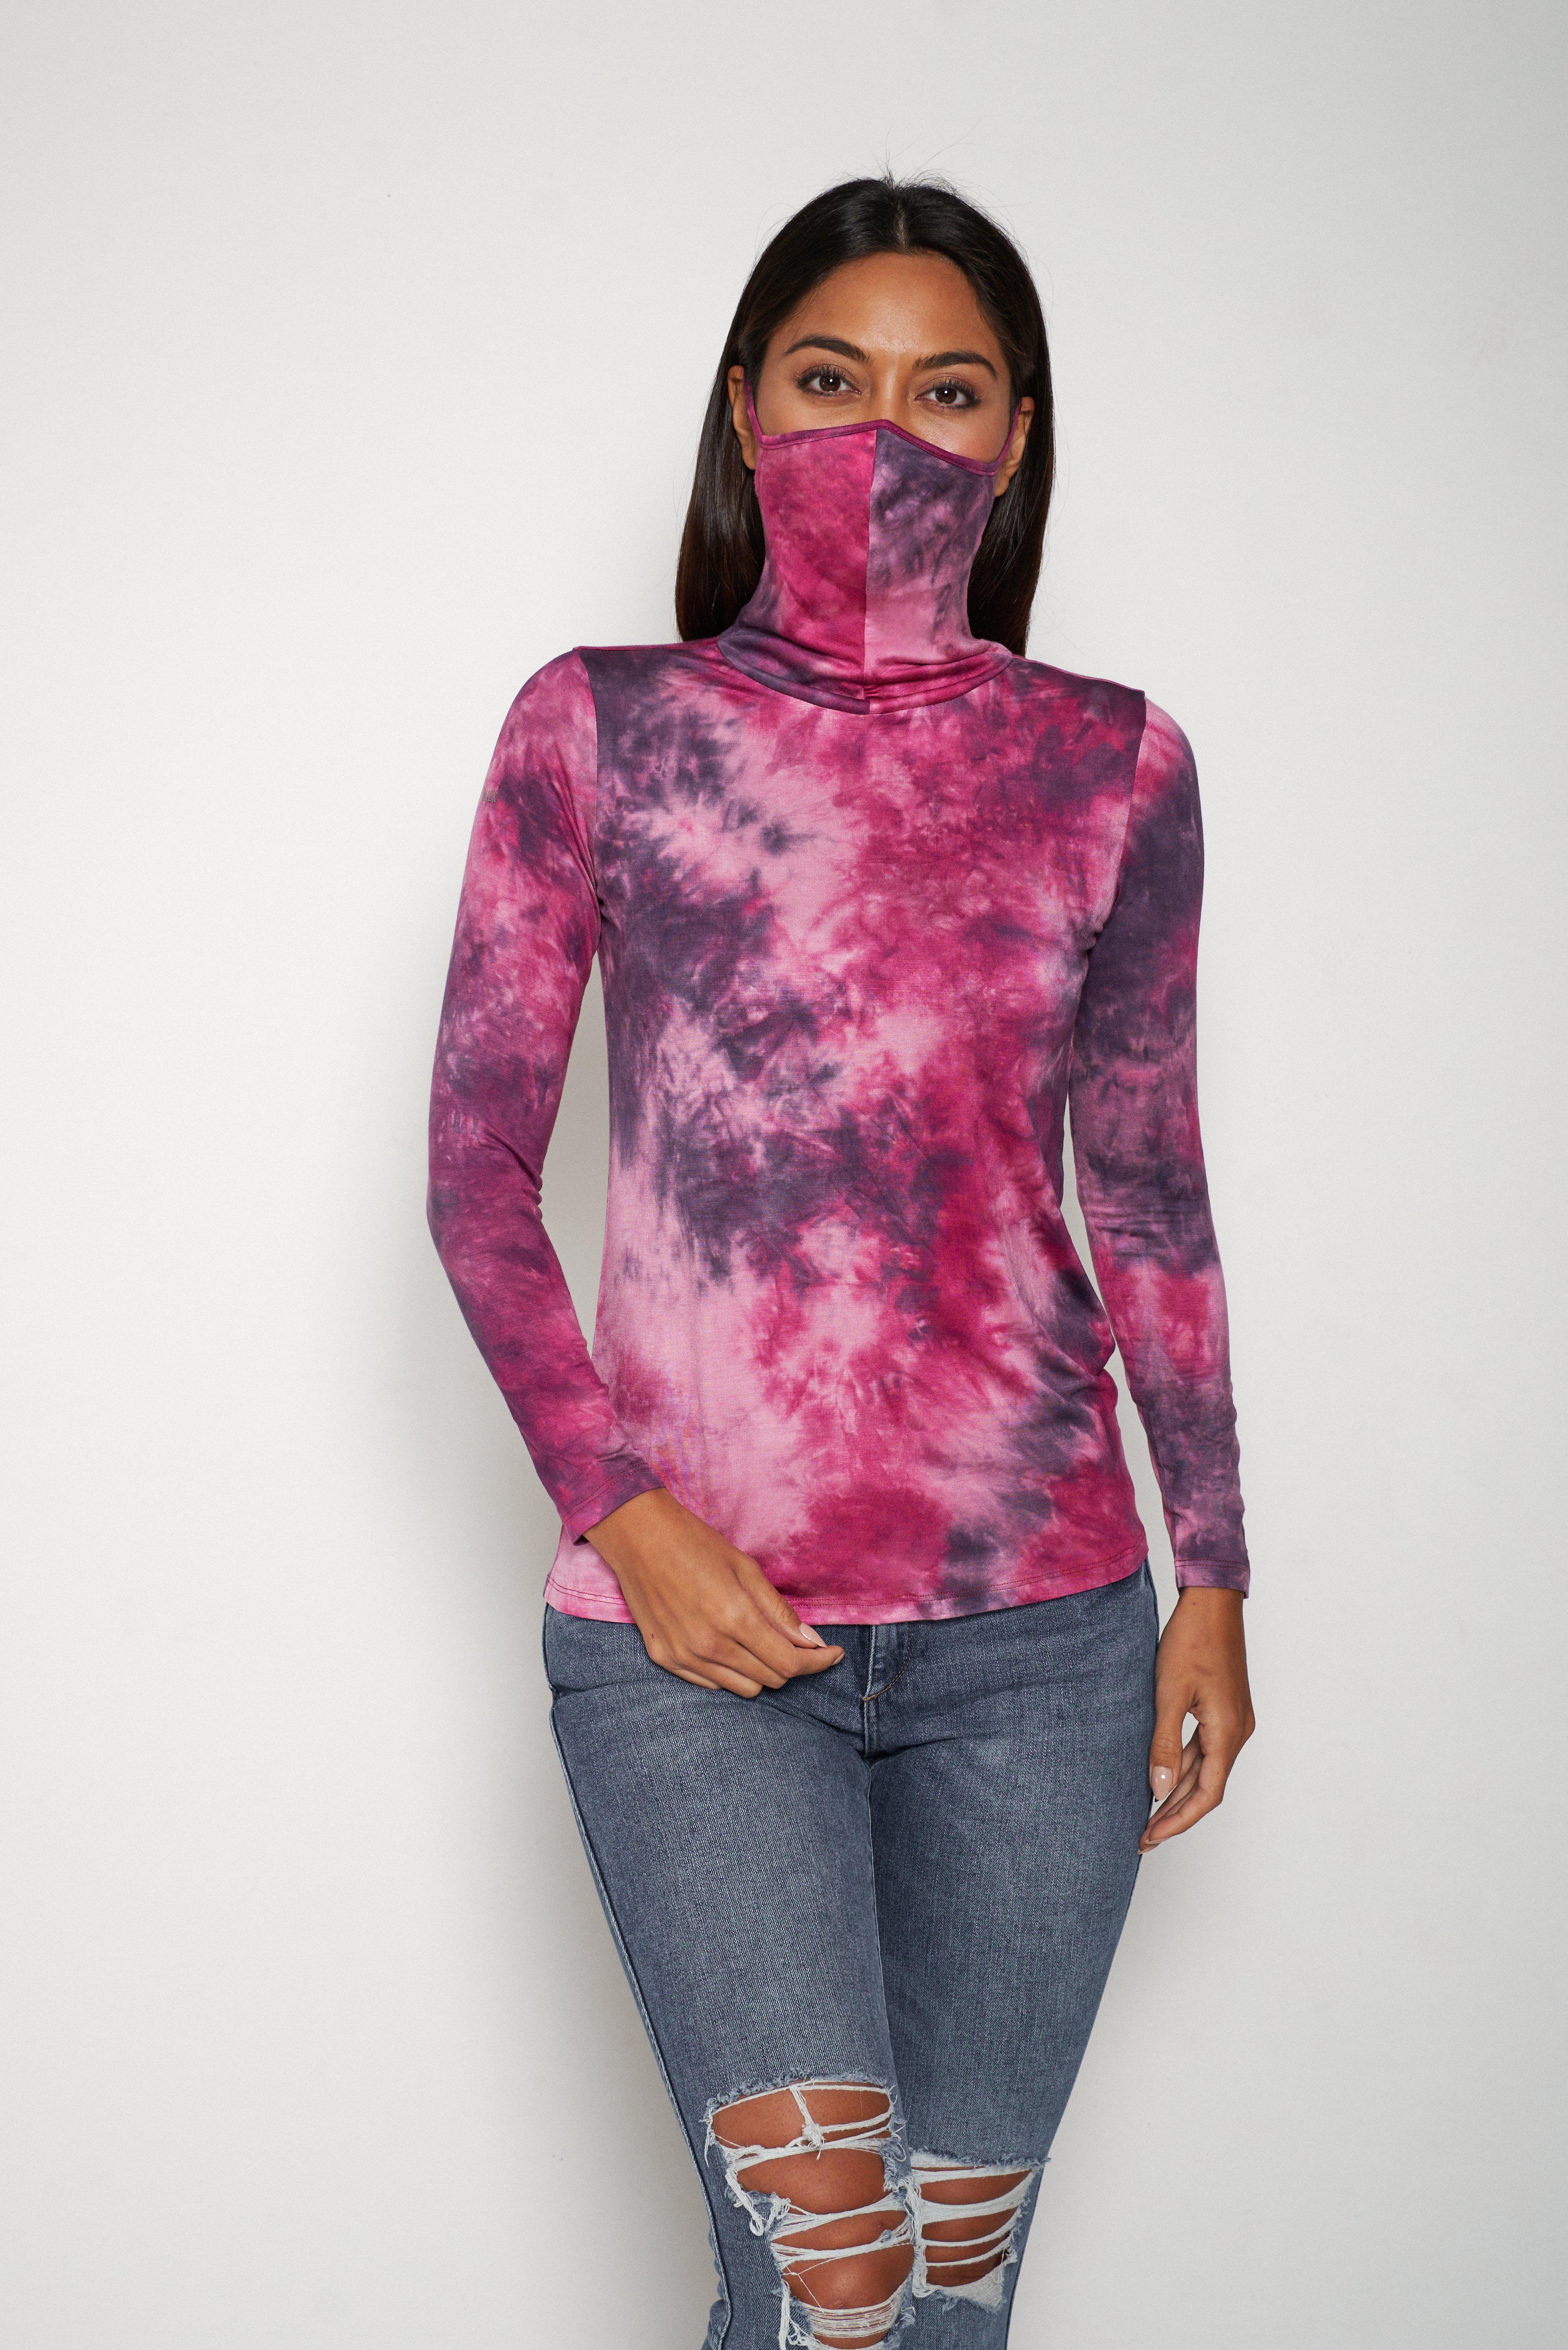 Adult Long Sleeve Pink Purple Tie-dye #6 Shmask™ Earloop Face Mask for Kids and Adults